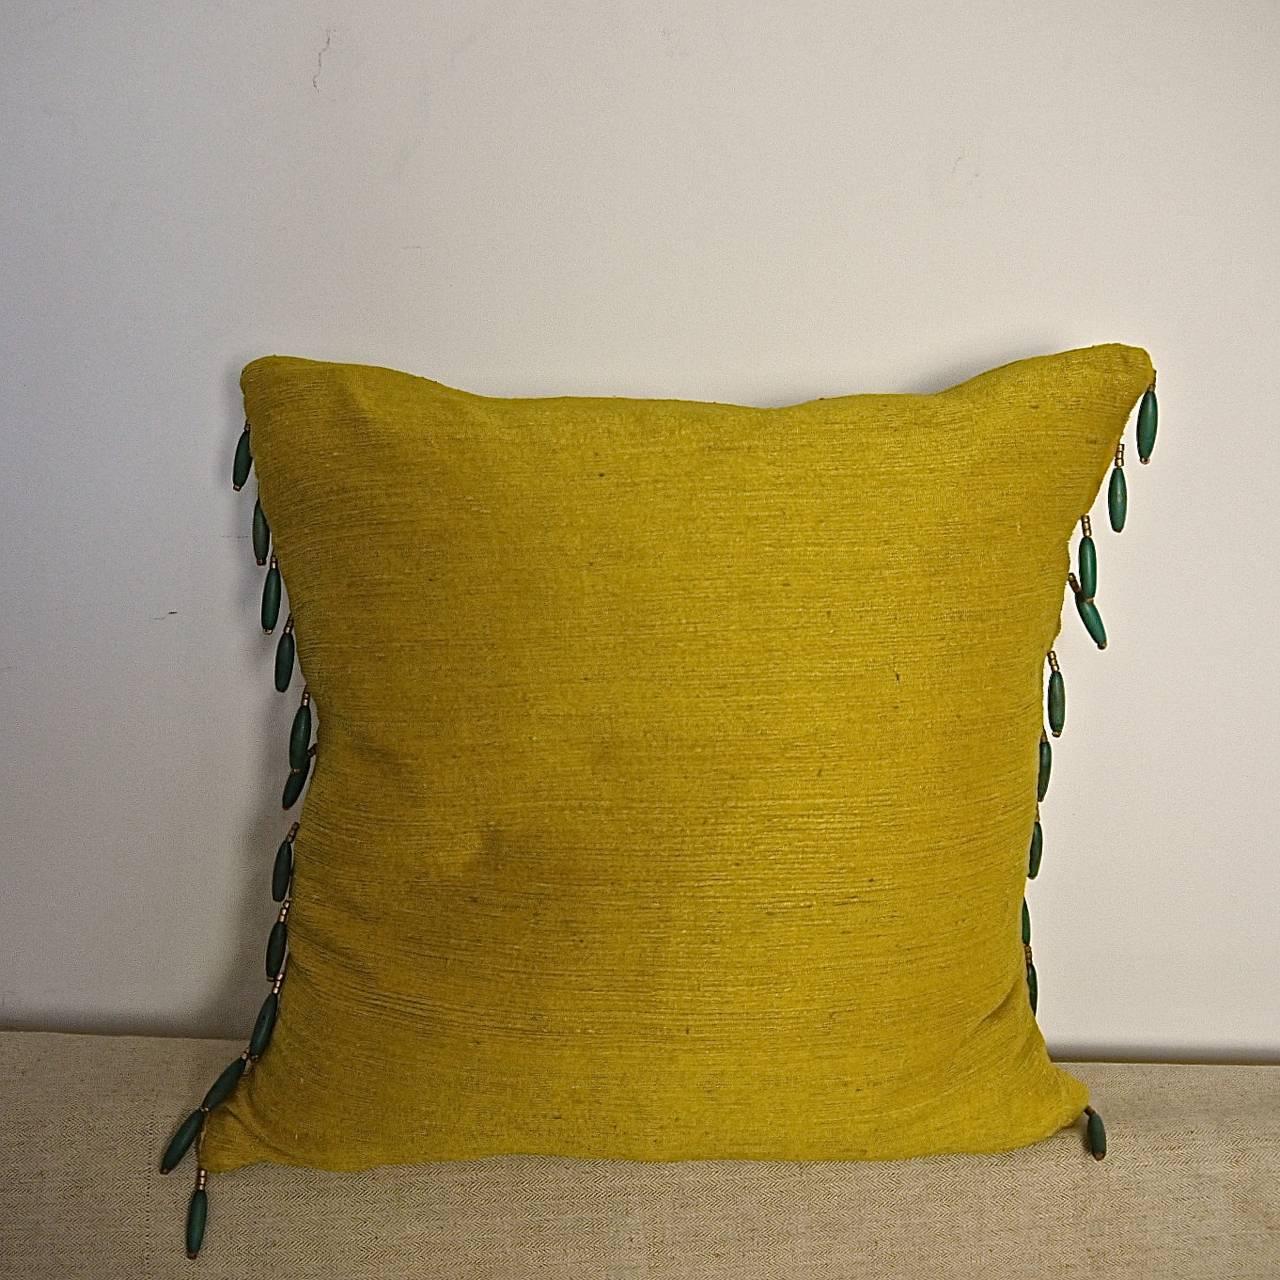 Early 19th century French bourette de soie cushion in a rich saffron yellow with a 1920s French green and gold wooden beaded trim and backed in the same fabric.